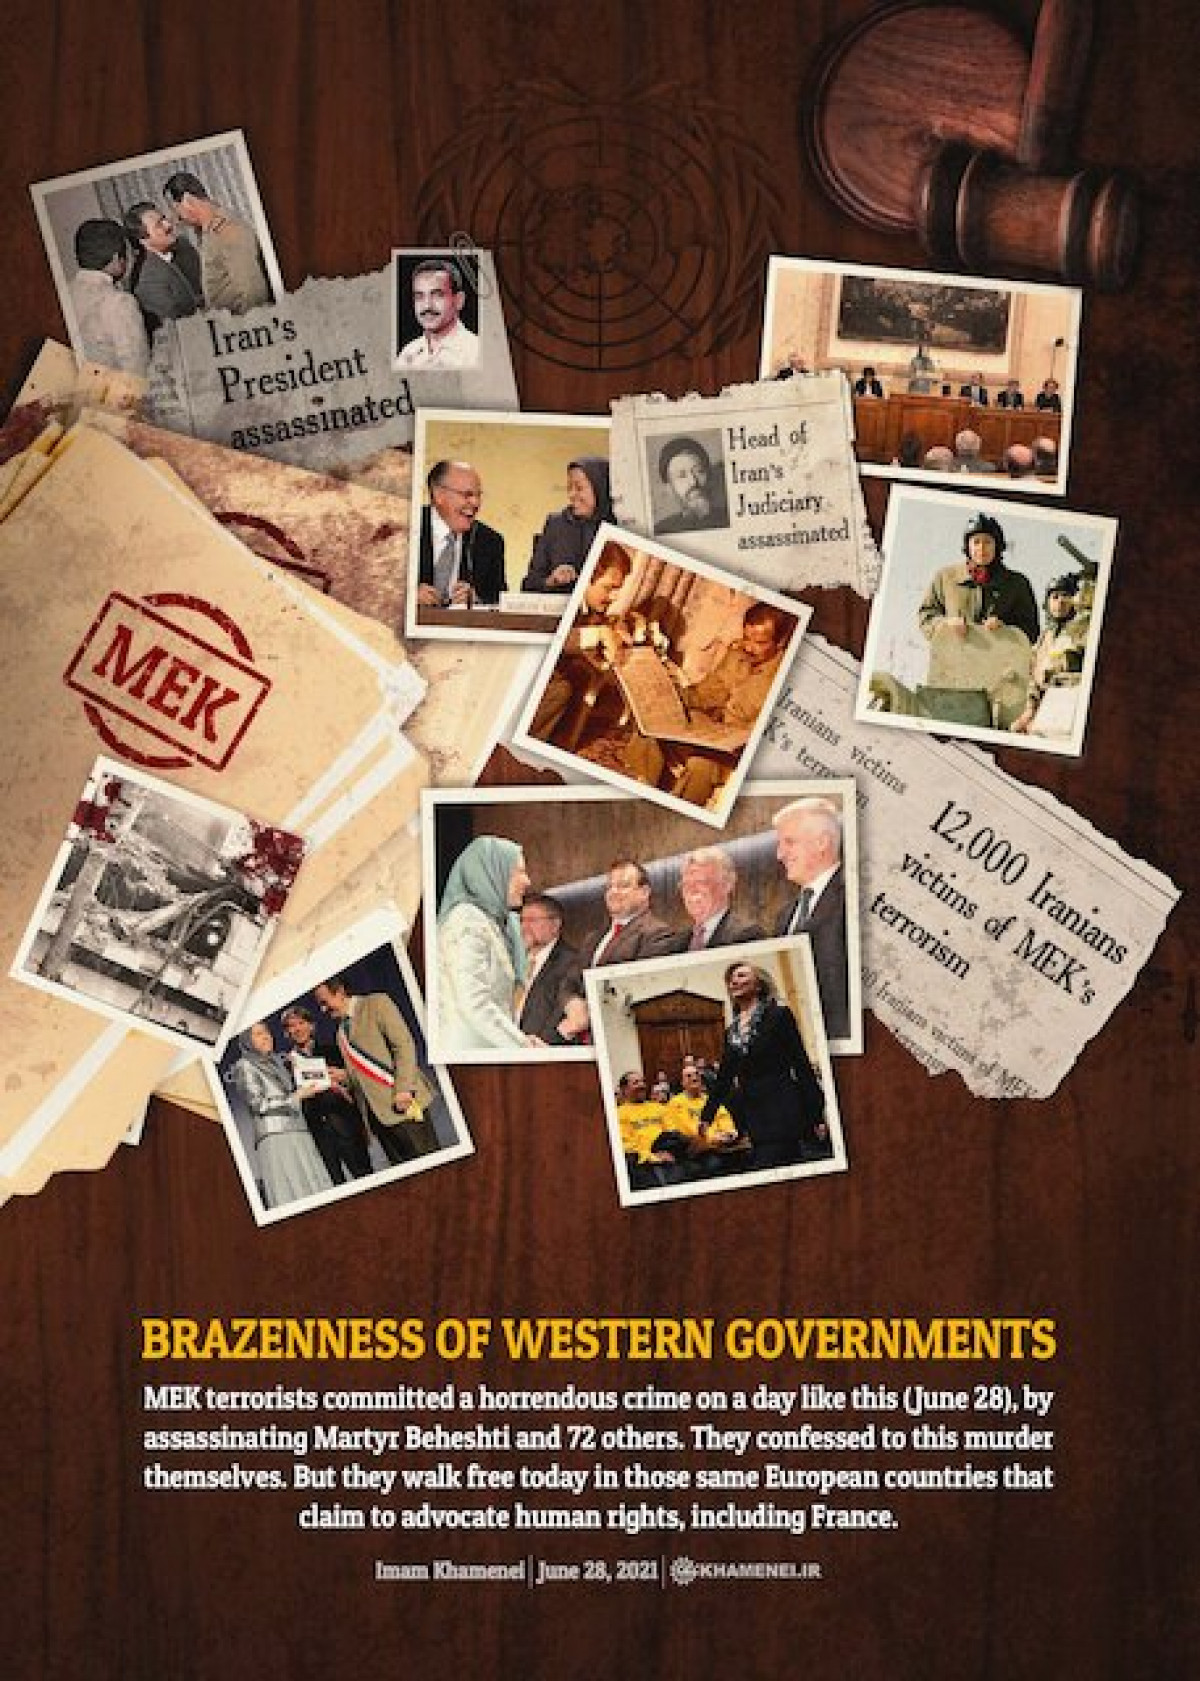 Brazenness of Western governments